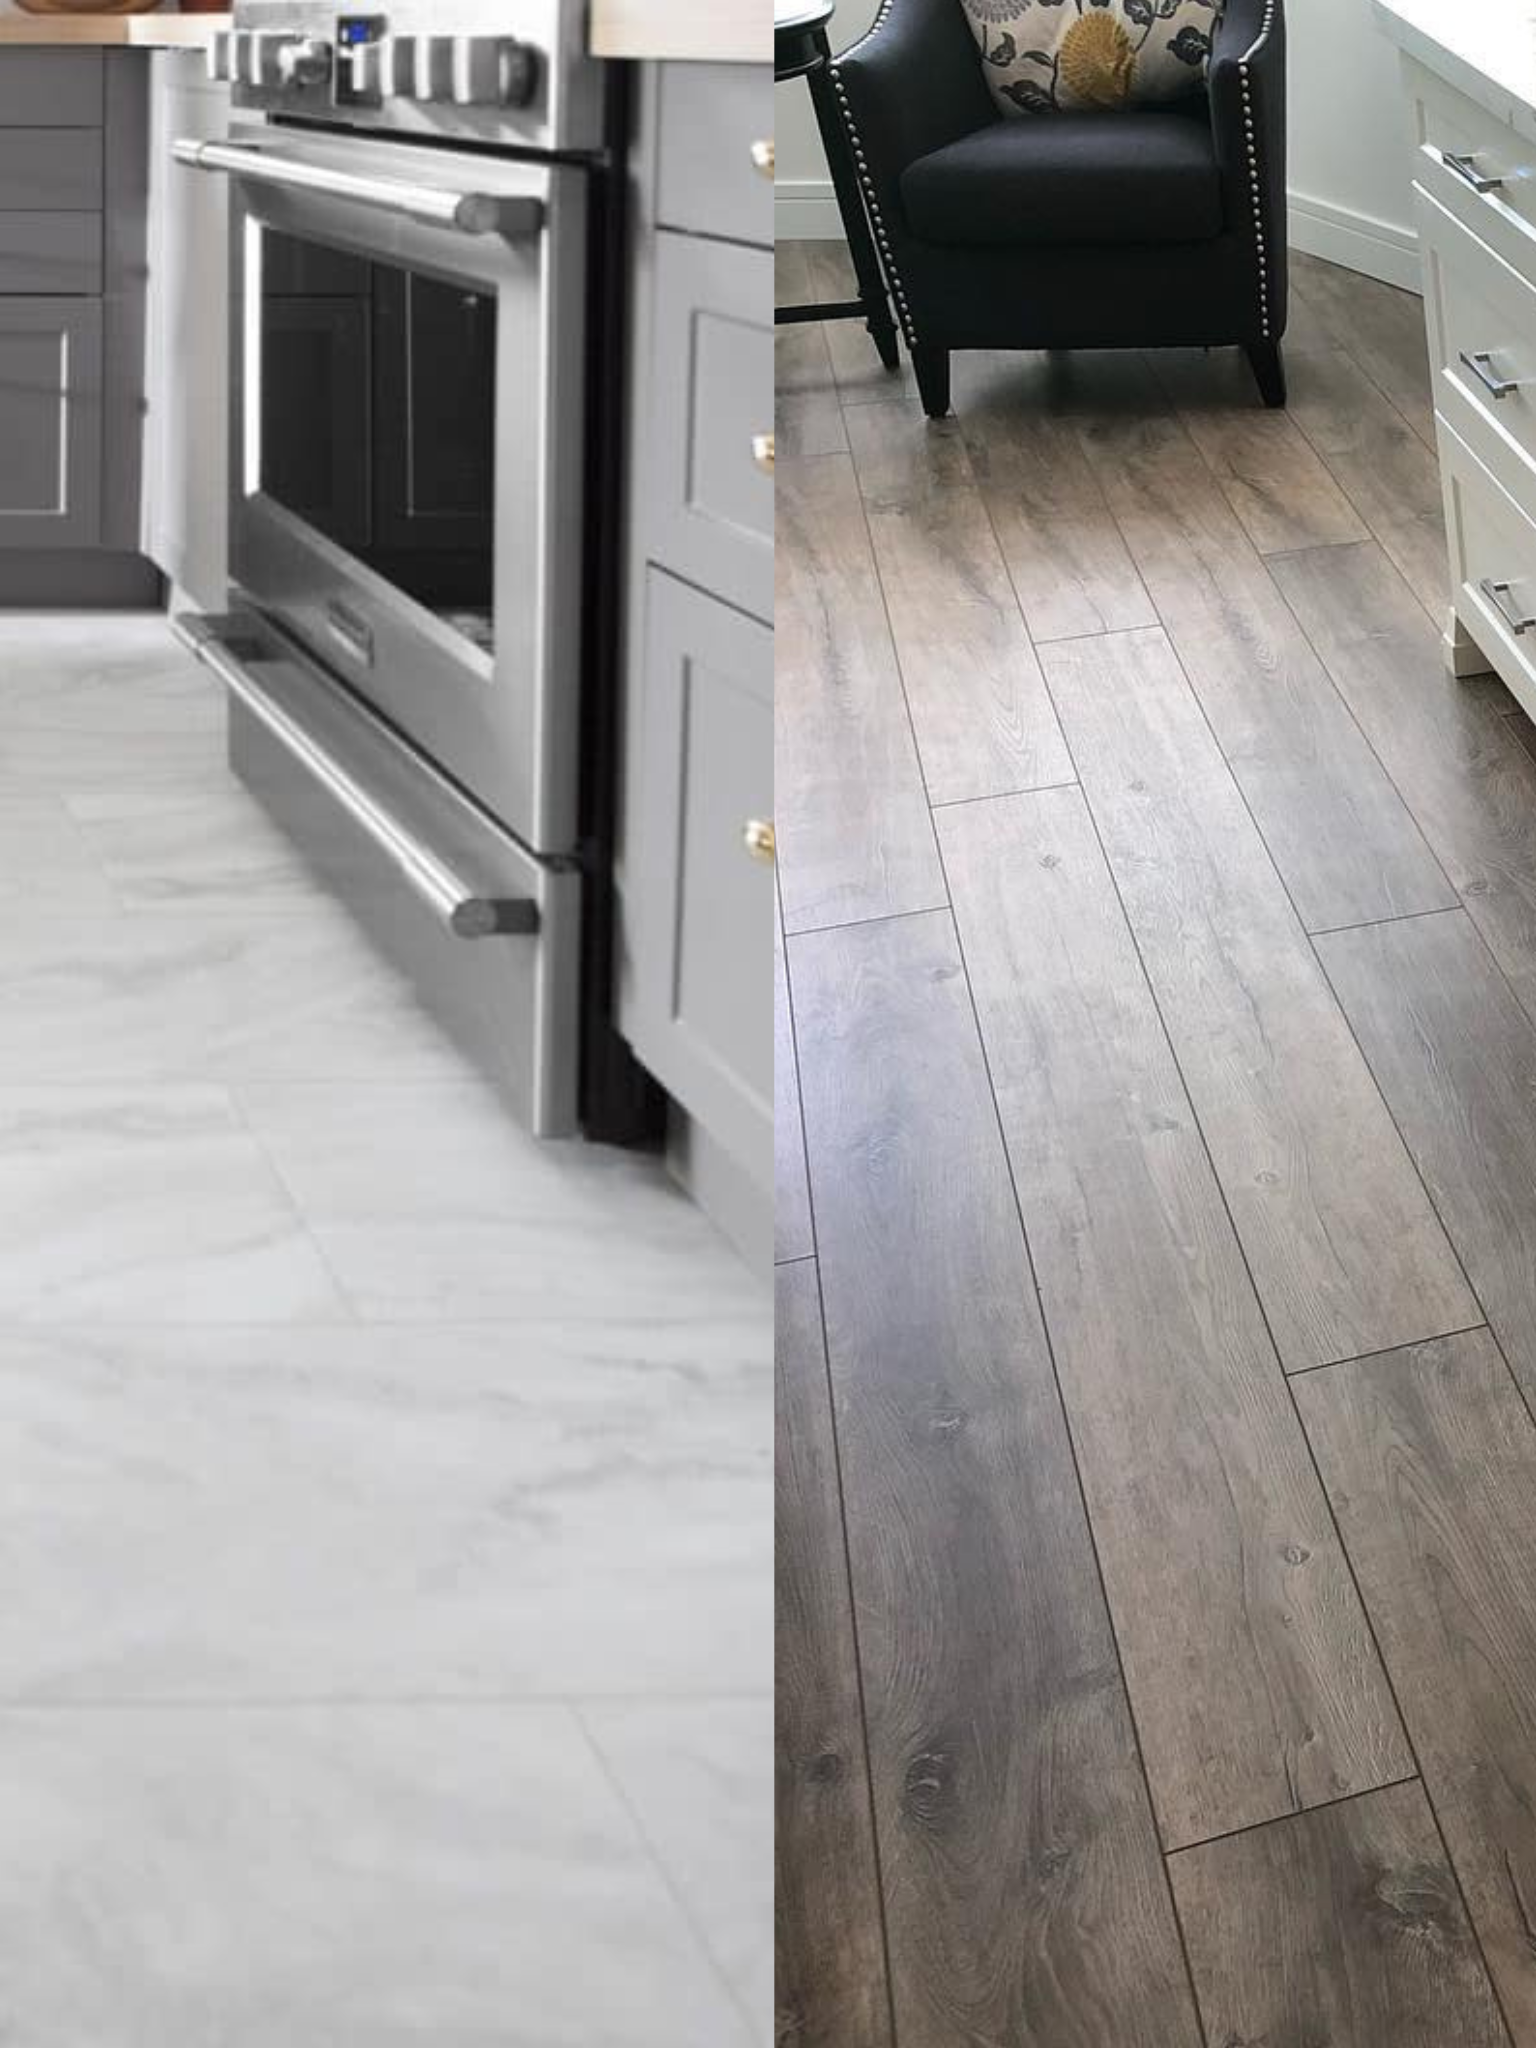 6 Best Flooring Options For Your Kitchen